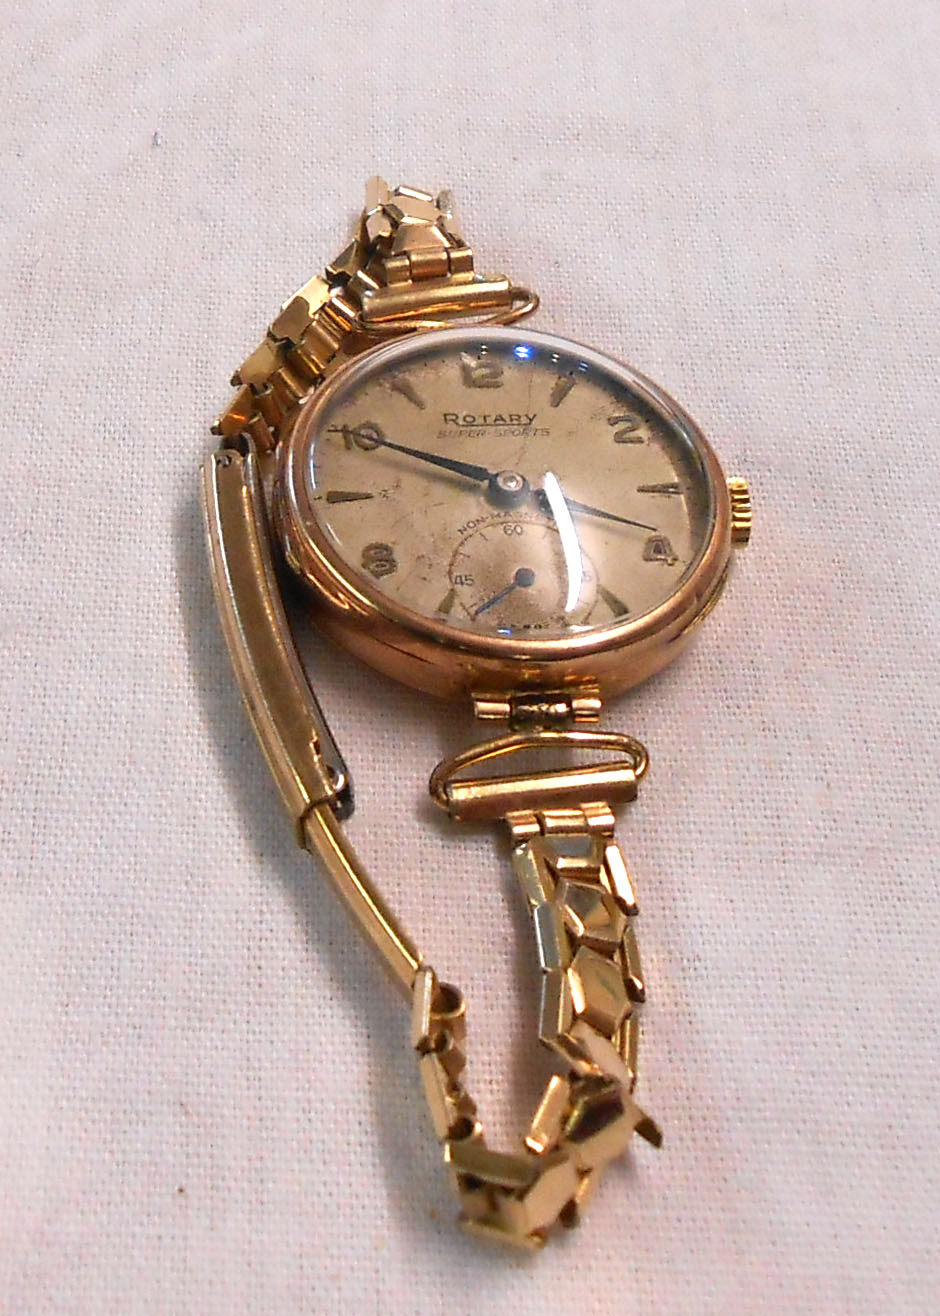 A 9ct. rose gold cased Rotary Super Sports wristwatch - London 1917, on replacement gold plated